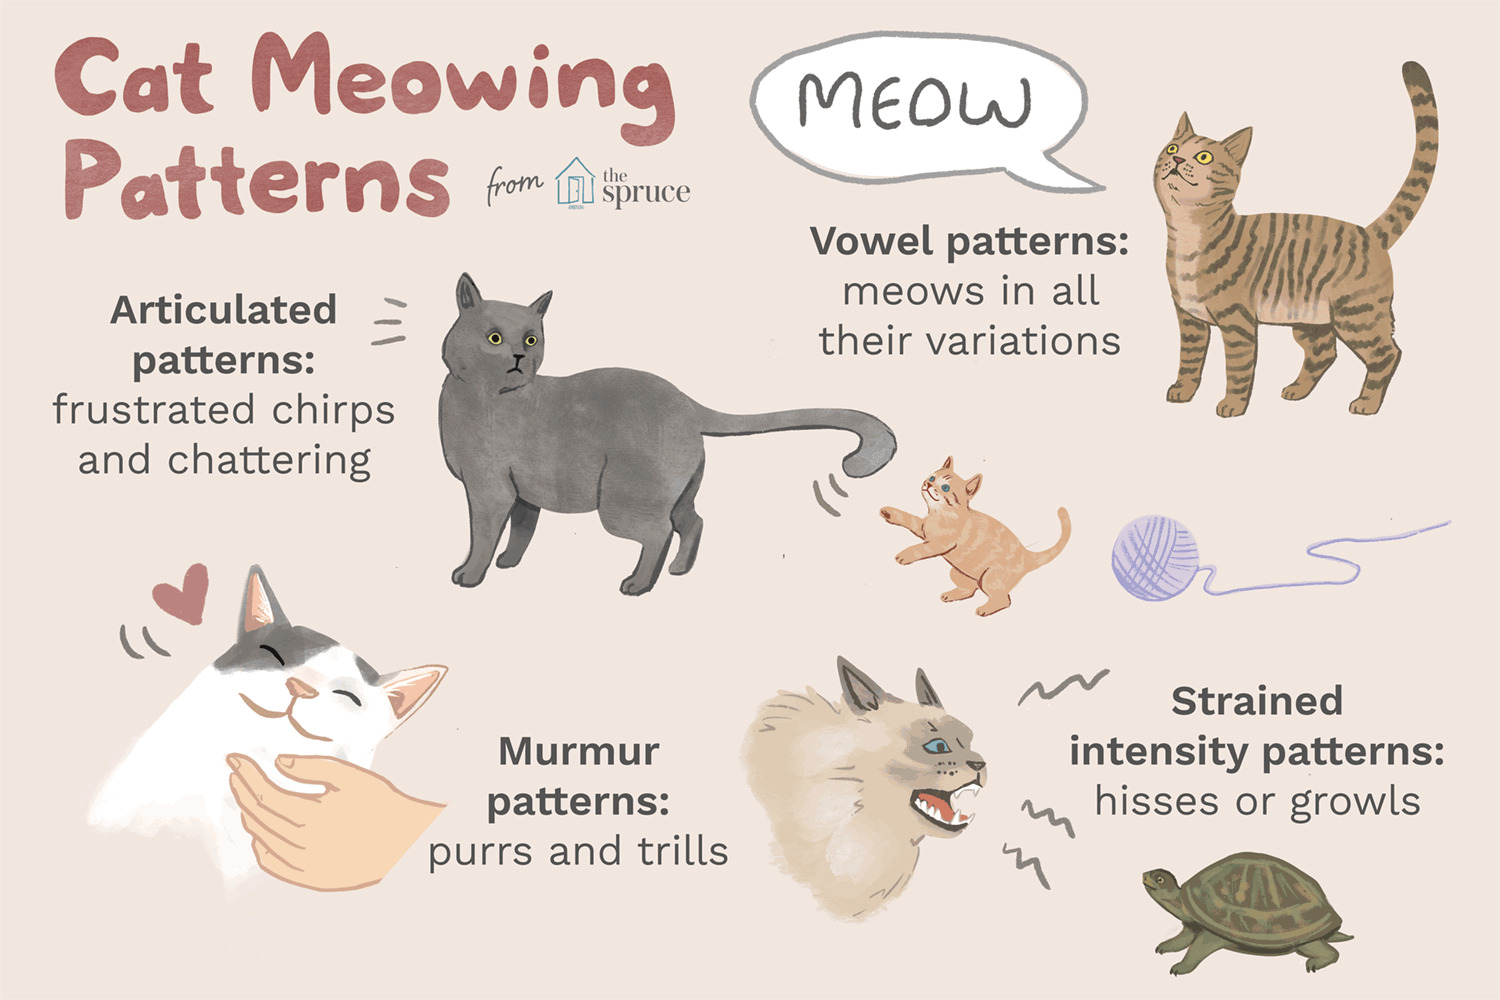 cat meowing patterns illustration